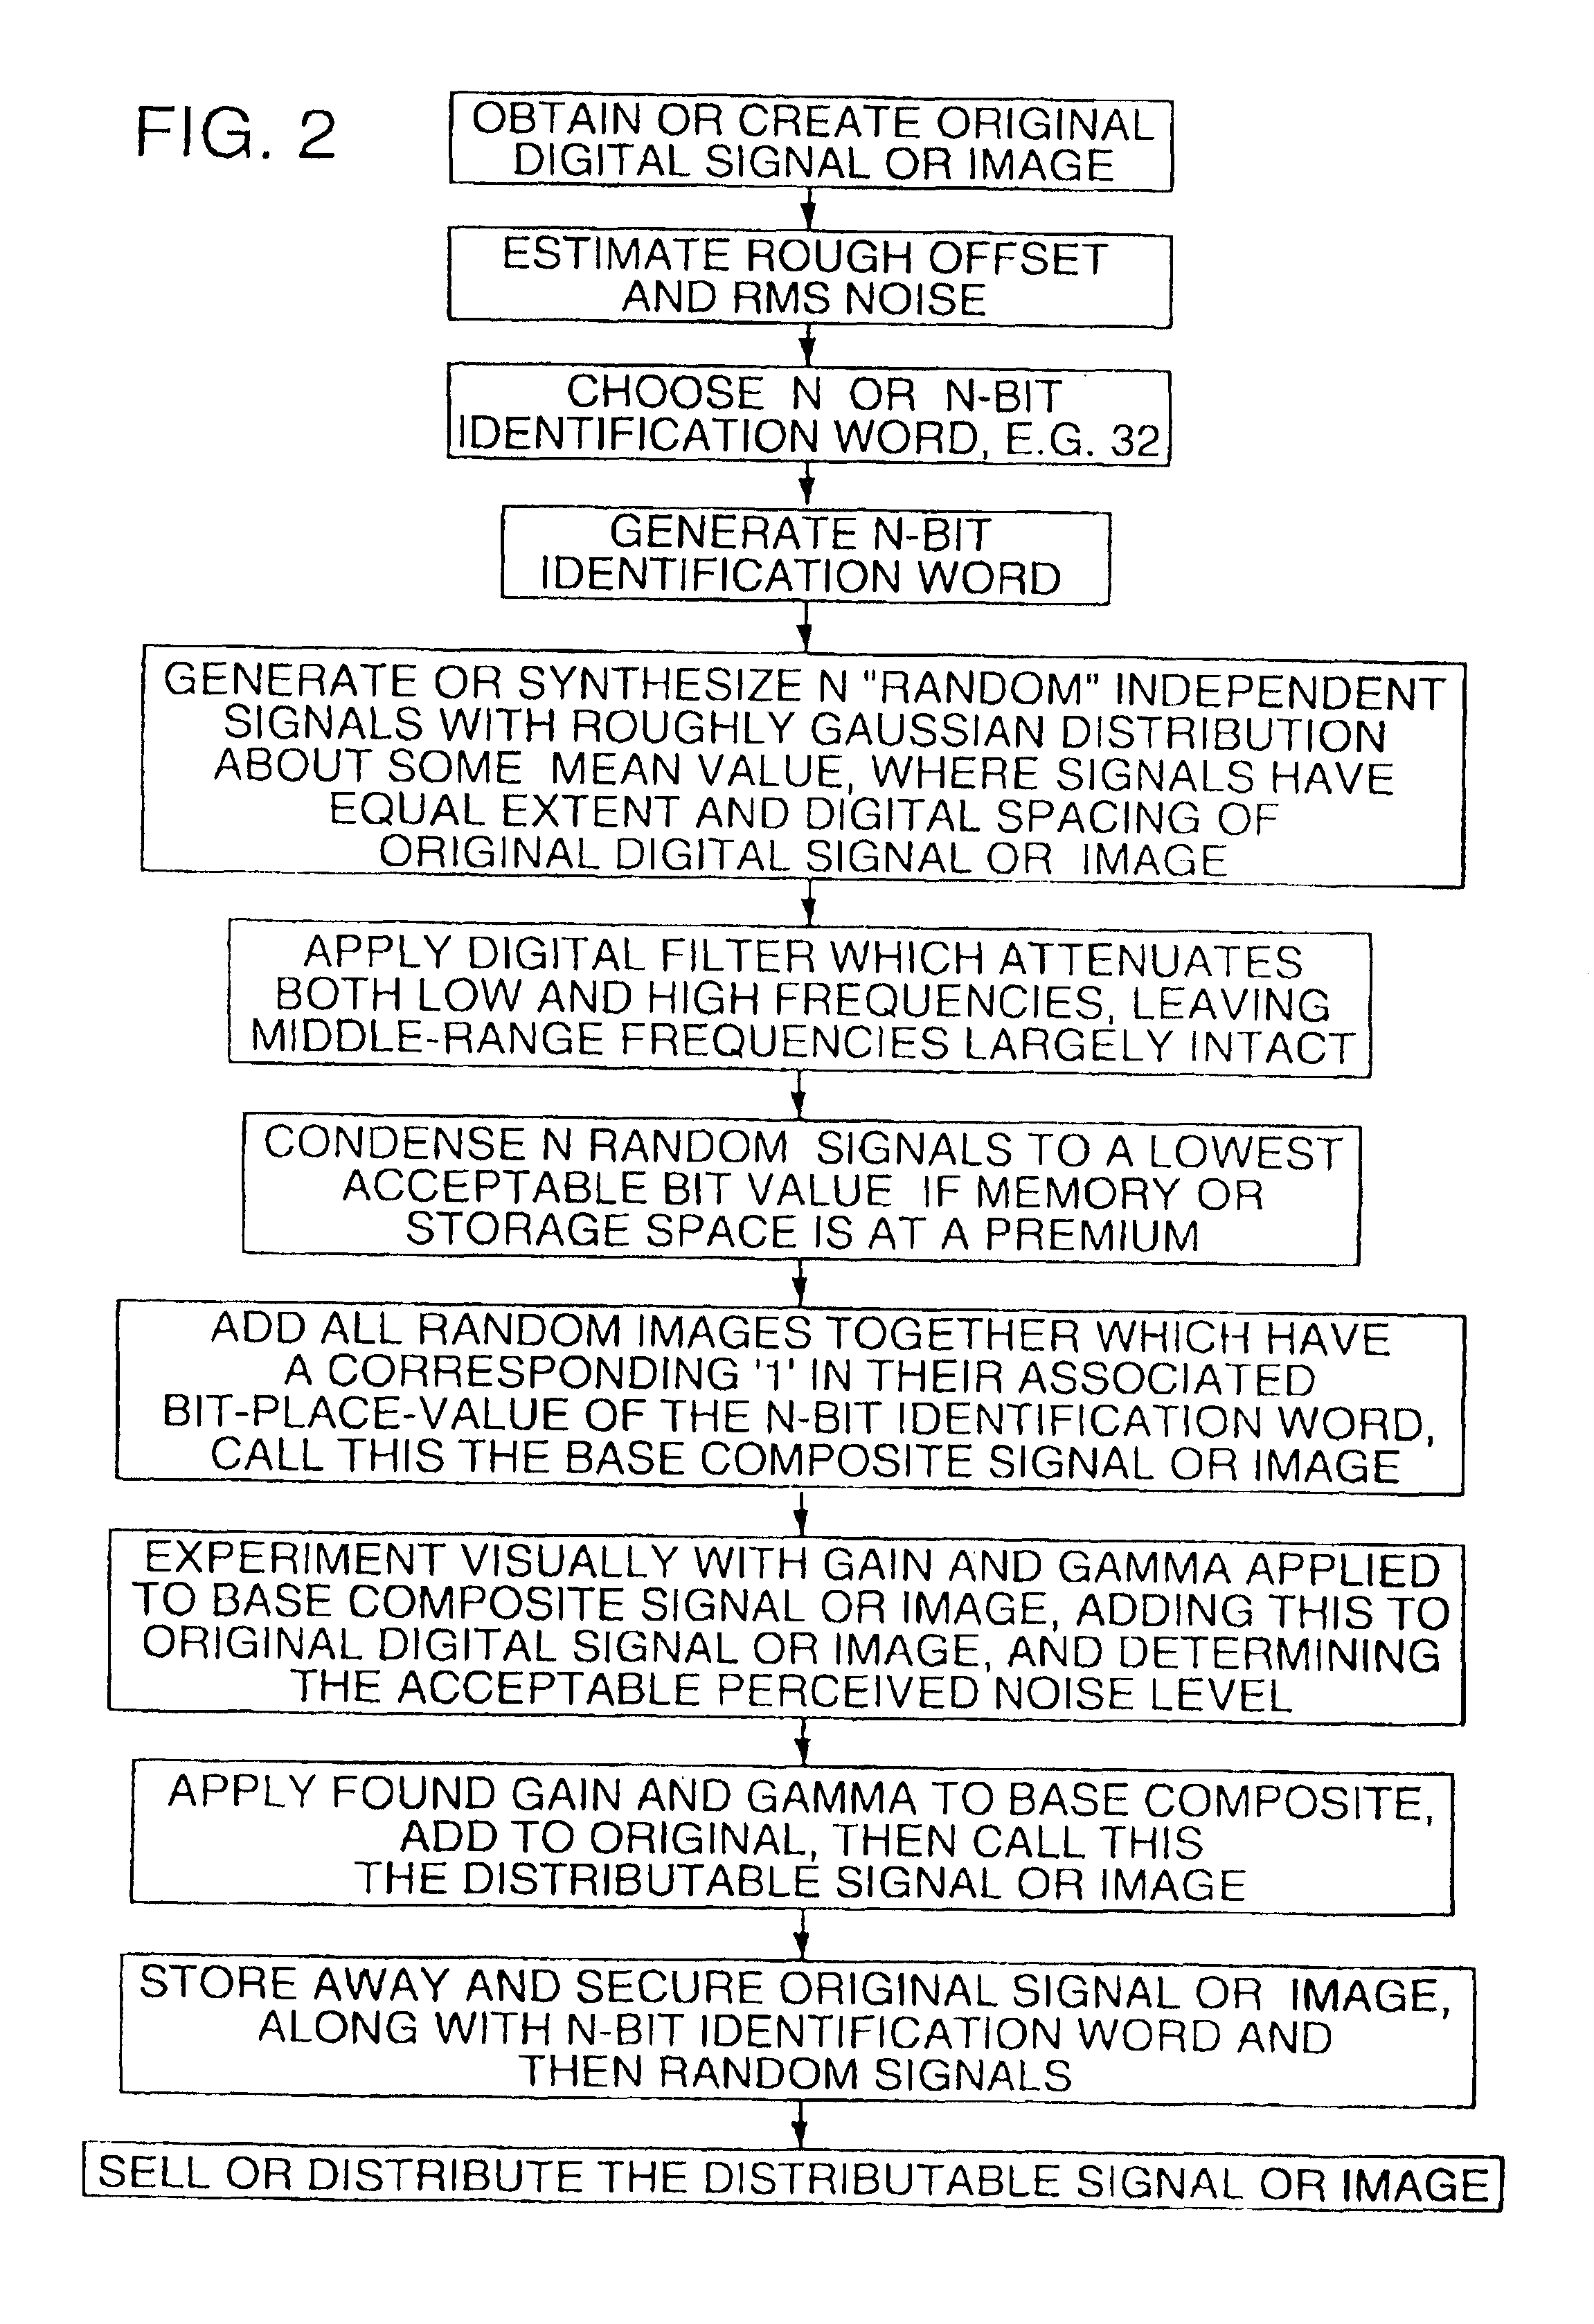 Methods for surveying dissemination of proprietary empirical data